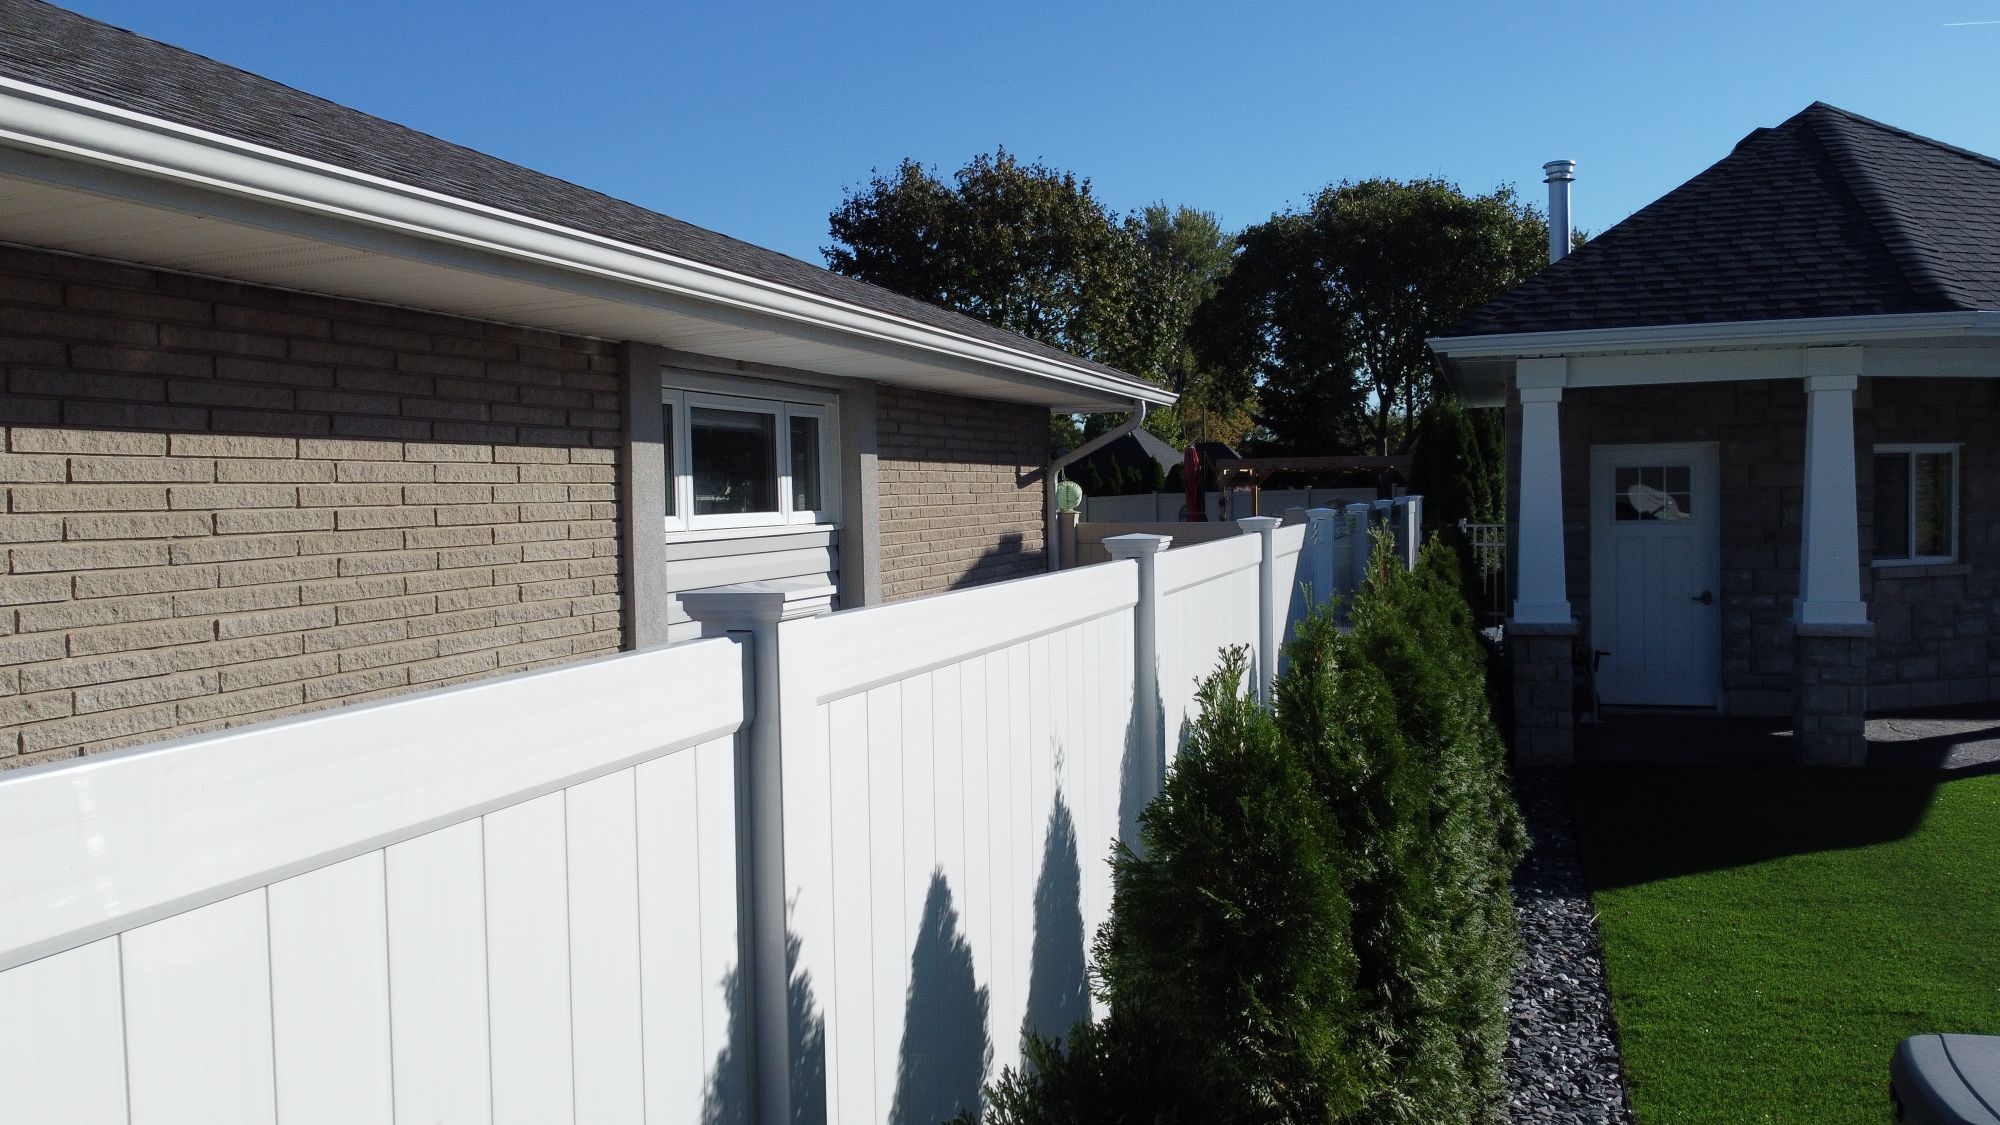 White Homeland Vinyl fence that we installed in Tecumseh. With a row of cedar plants in front of it, the contrasting colours sharply accentuate this craftsman style home.